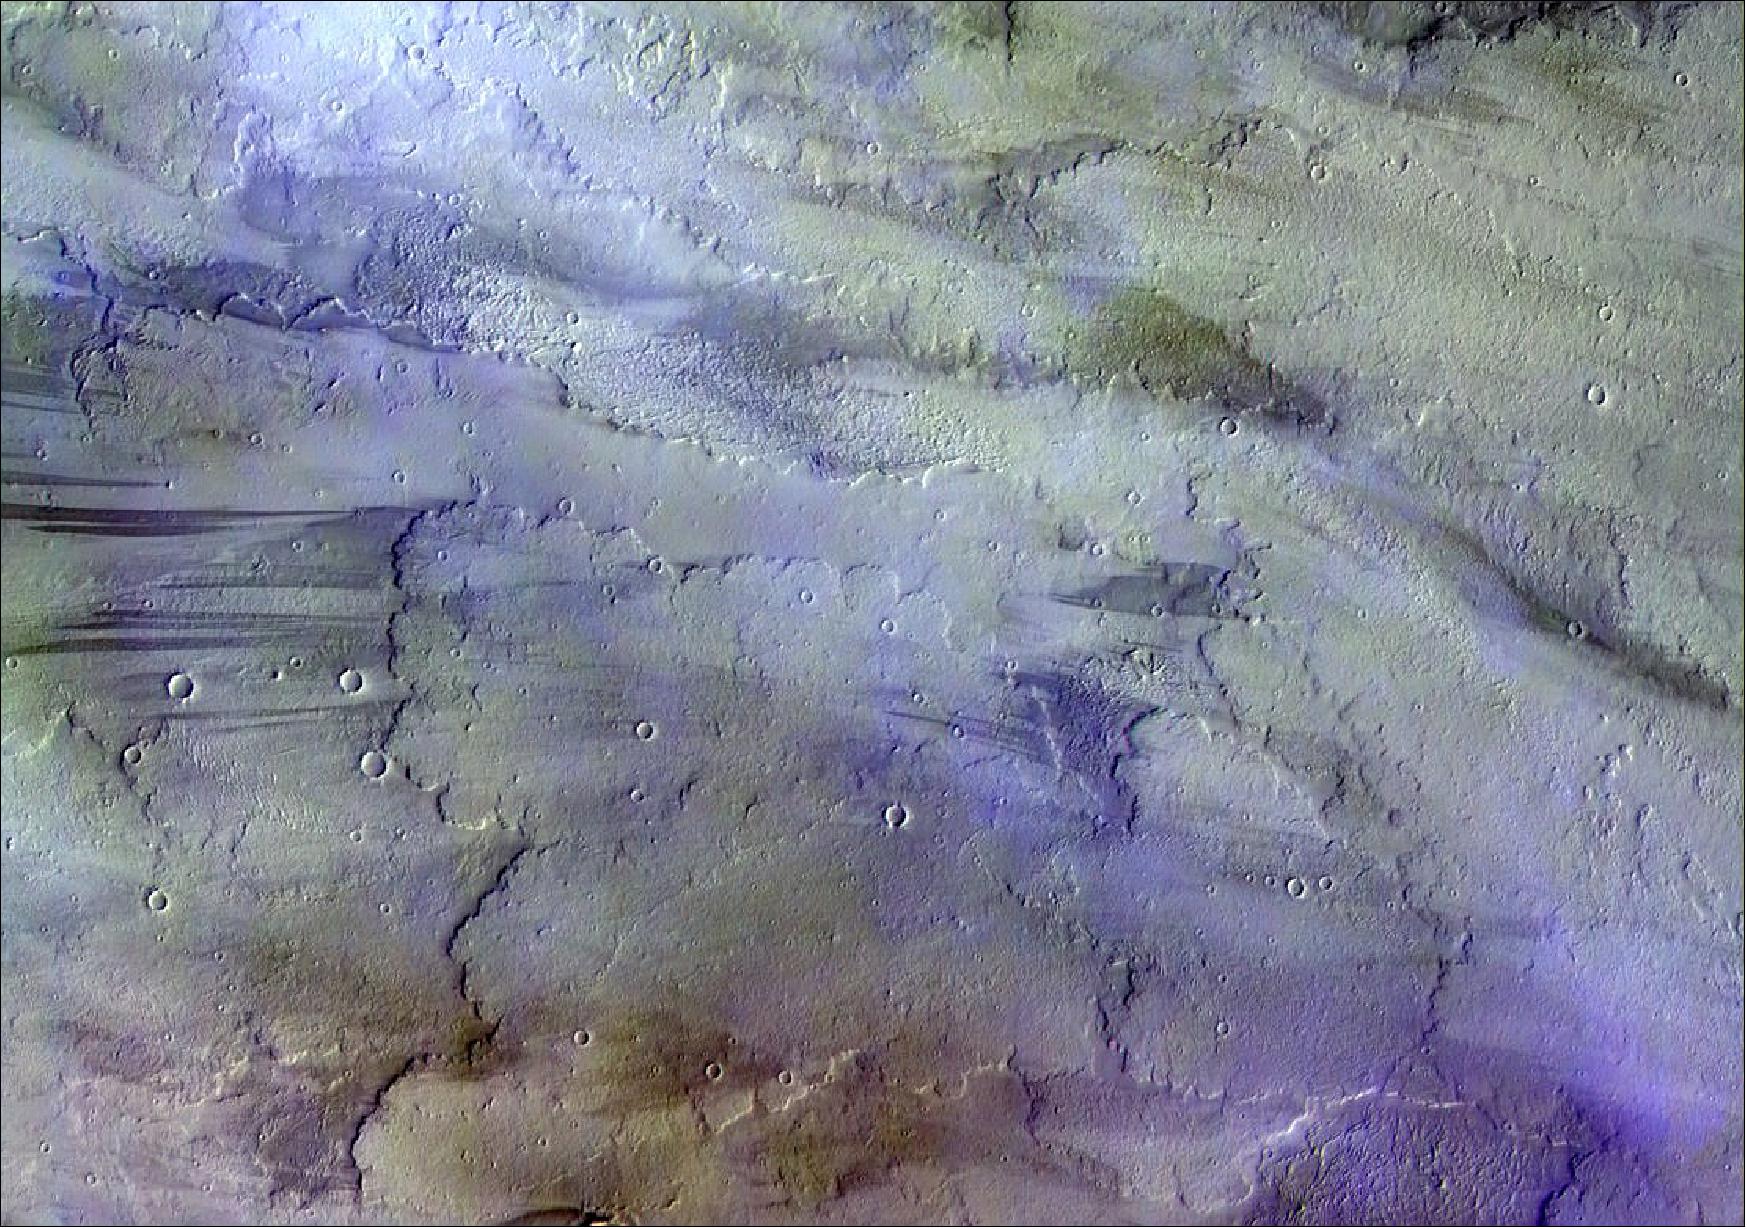 Figure 100: A cloudy day over volcanic Mars, captured by the ExoMars orbiter. Clouds, most likely of water-ice, and atmospheric haze in the sky are colored blue/white in this image (image credit: ESA/Roscosmos/CaSSIS, CC BY-SA 3.0 IGO)